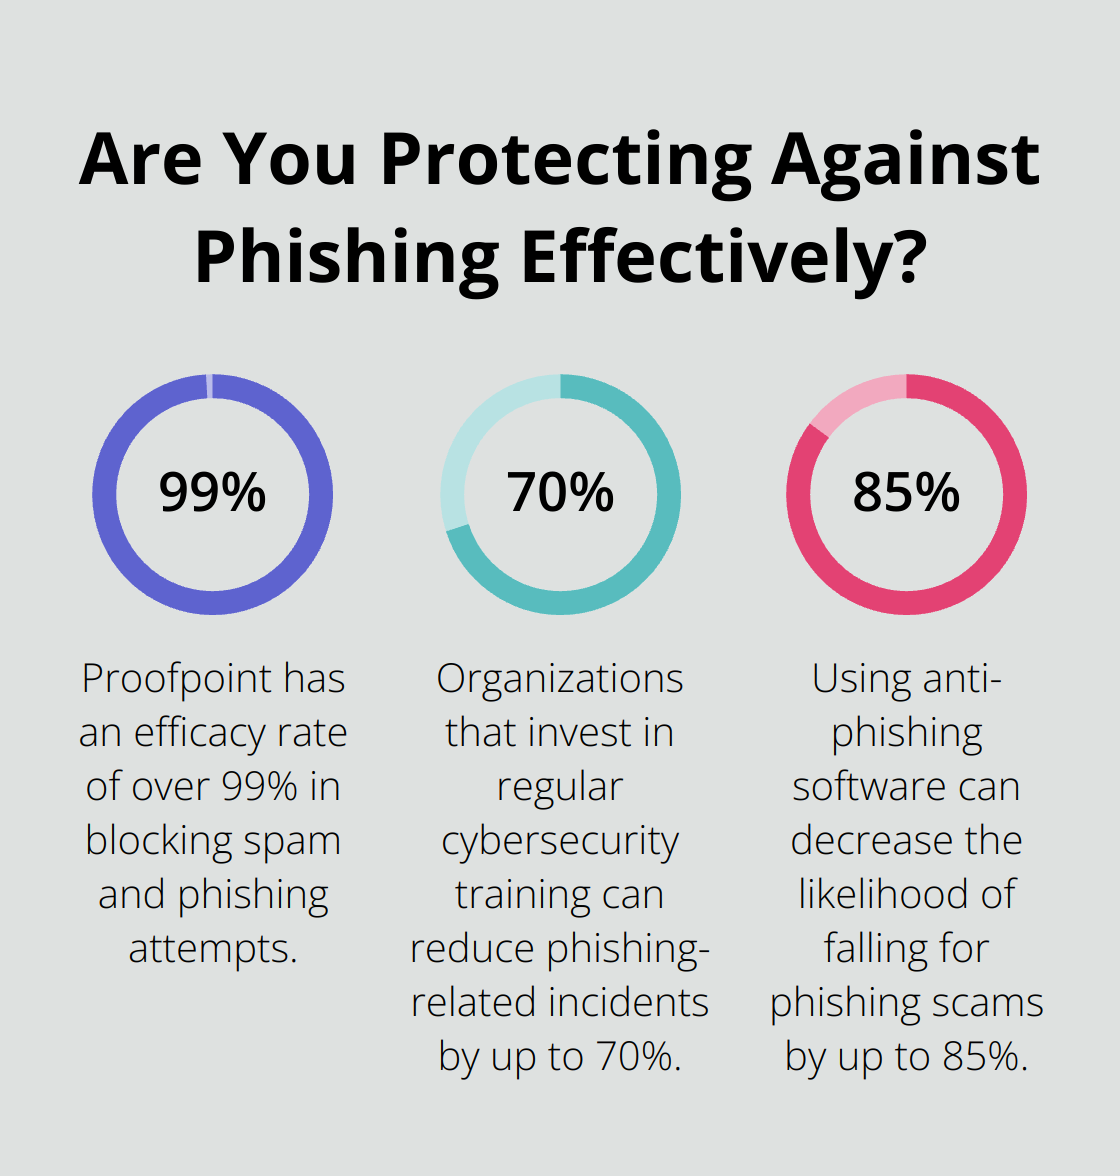 Fact - Are You Protecting Against Phishing Effectively?